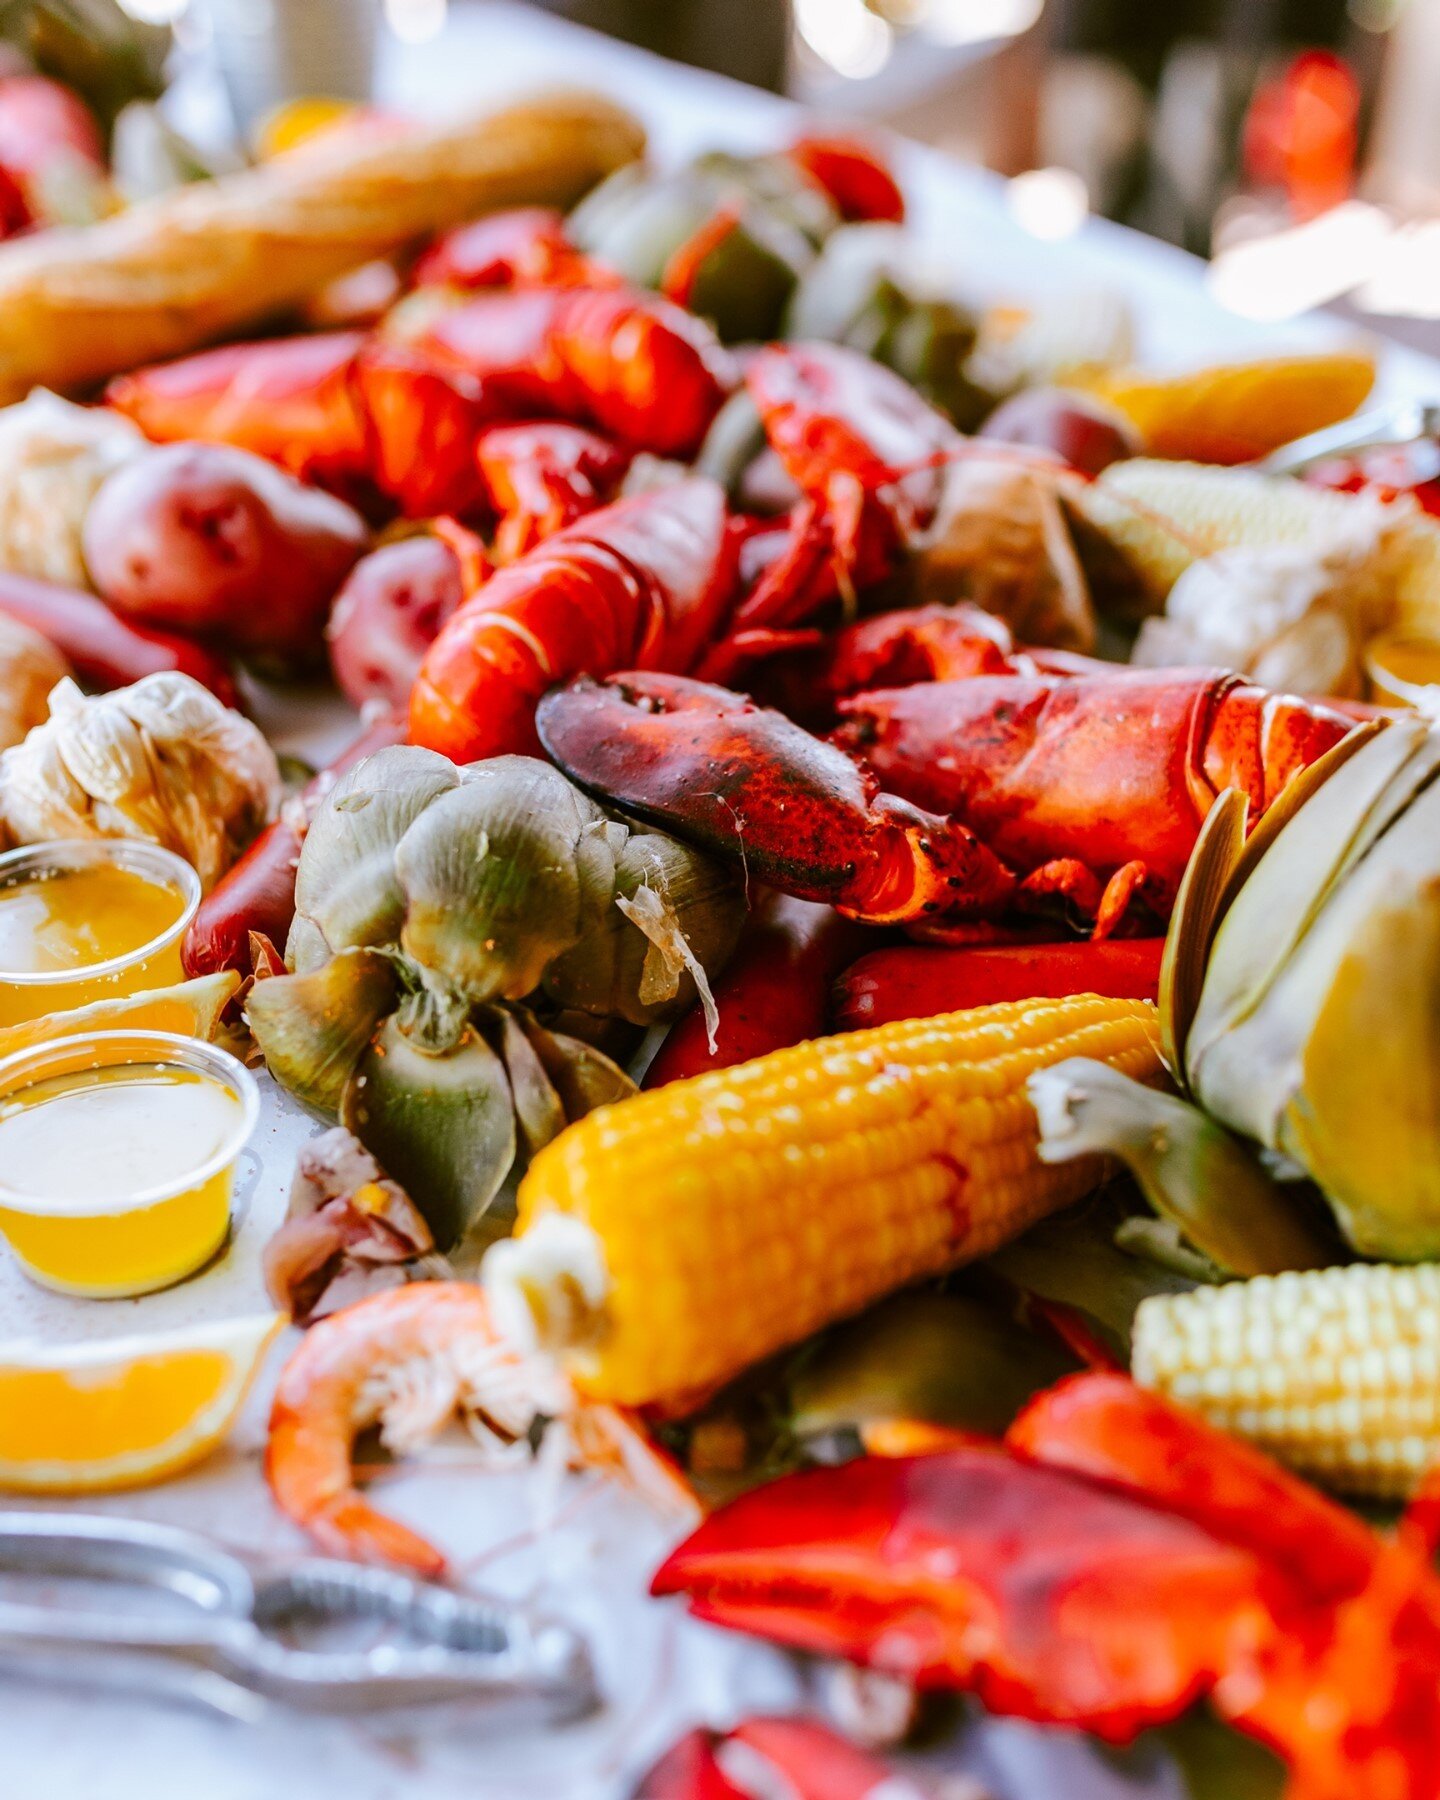 This will be the scene this evening at @heritageeats! Wine country's most authentic lobster boil, spread across huge tables, and packaged into warm, fresh, ready-to-enjoy dinners at home!  Thanks so much for all who ordered our &ldquo;First Crack,&qu